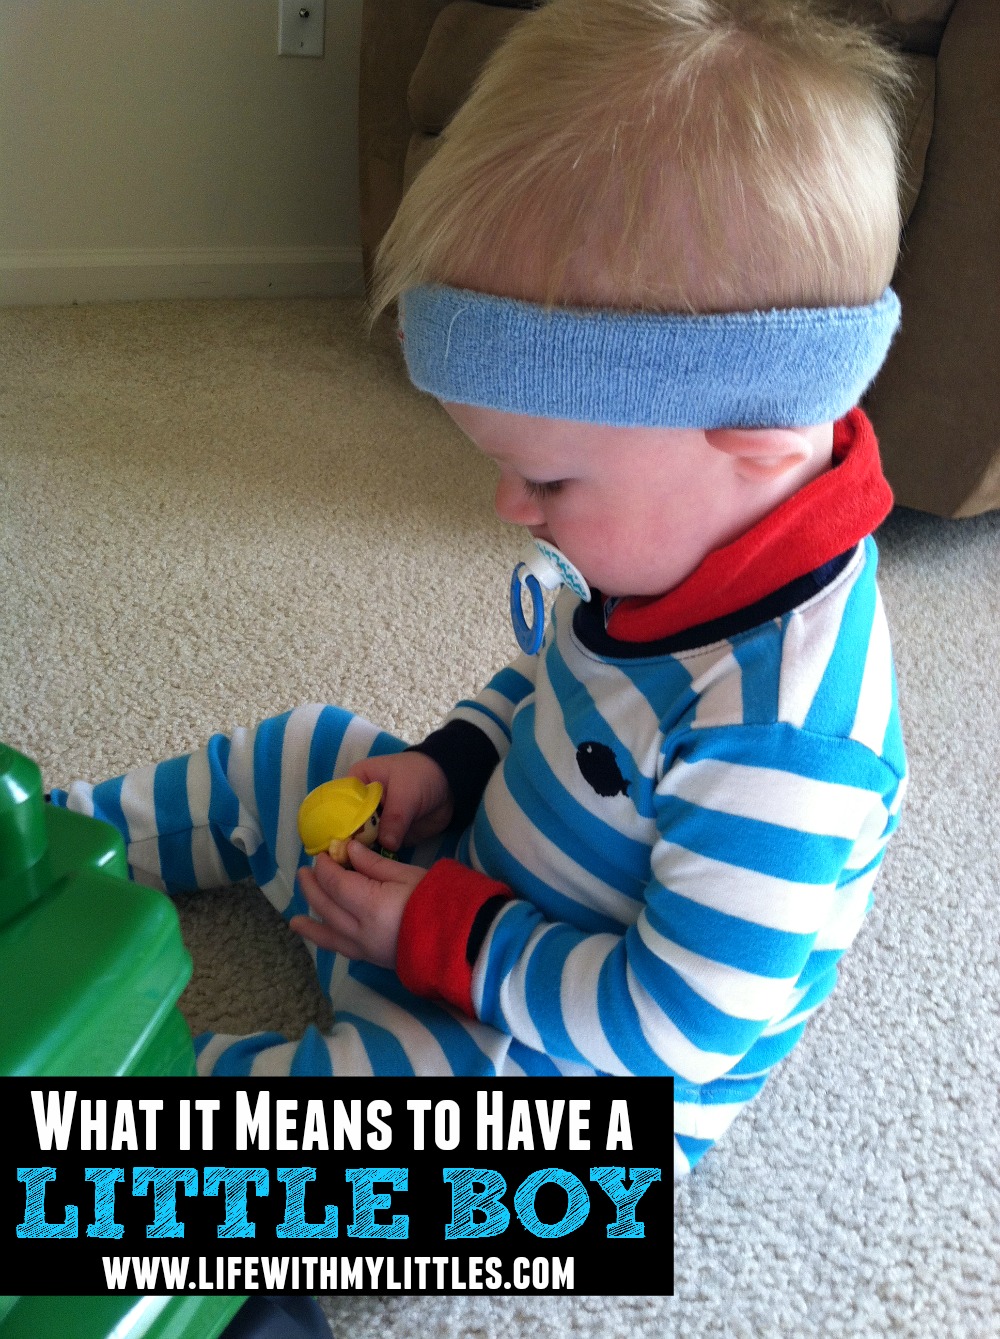 What It Means to Have a Little Boy